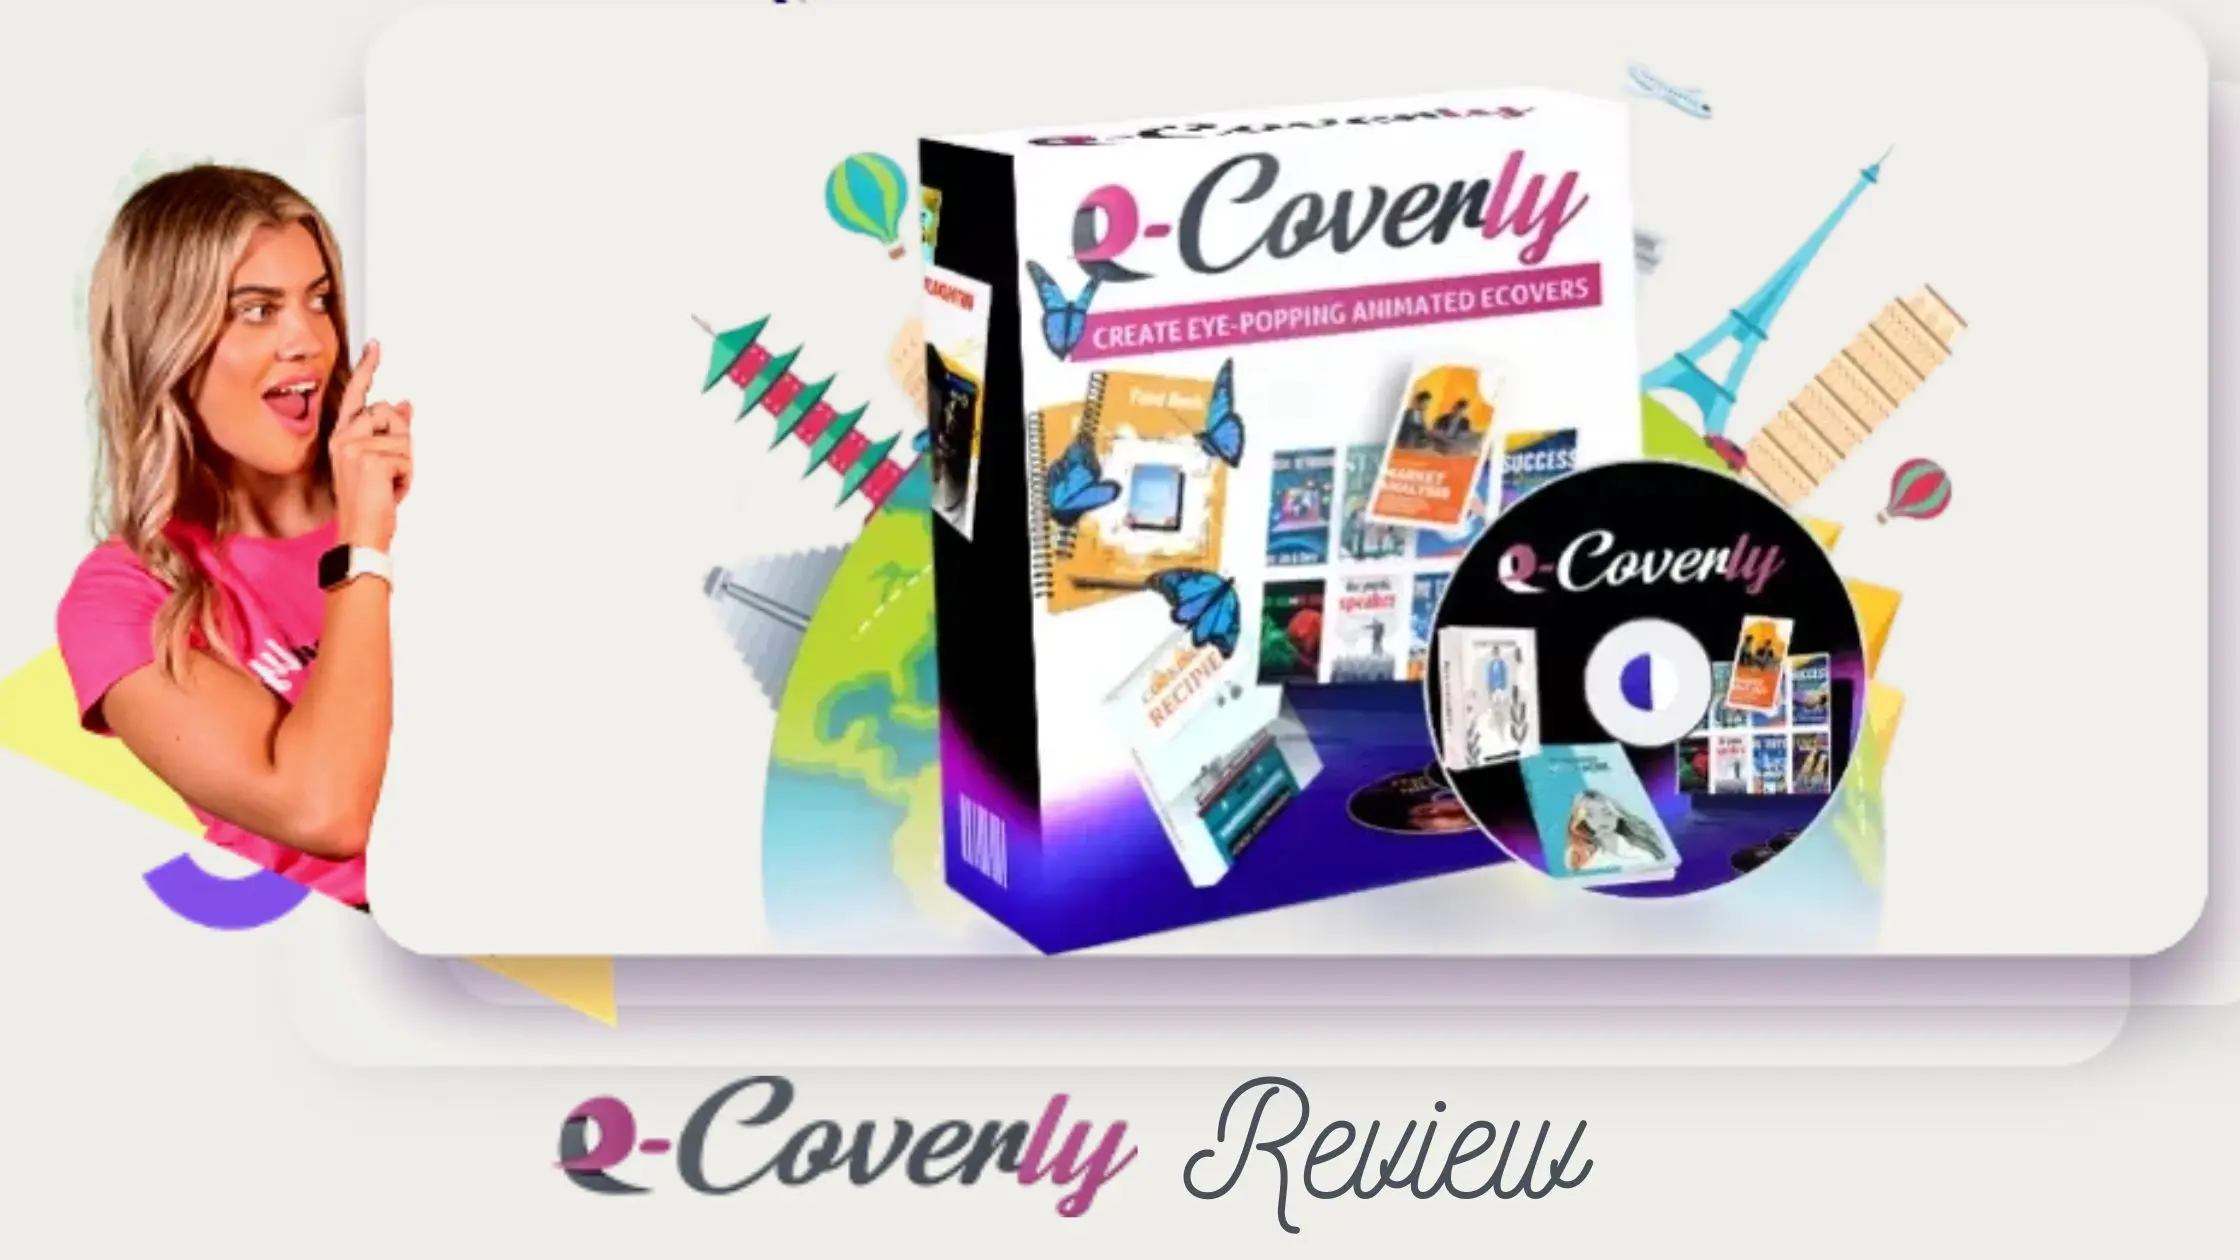 eCoverly Reviews